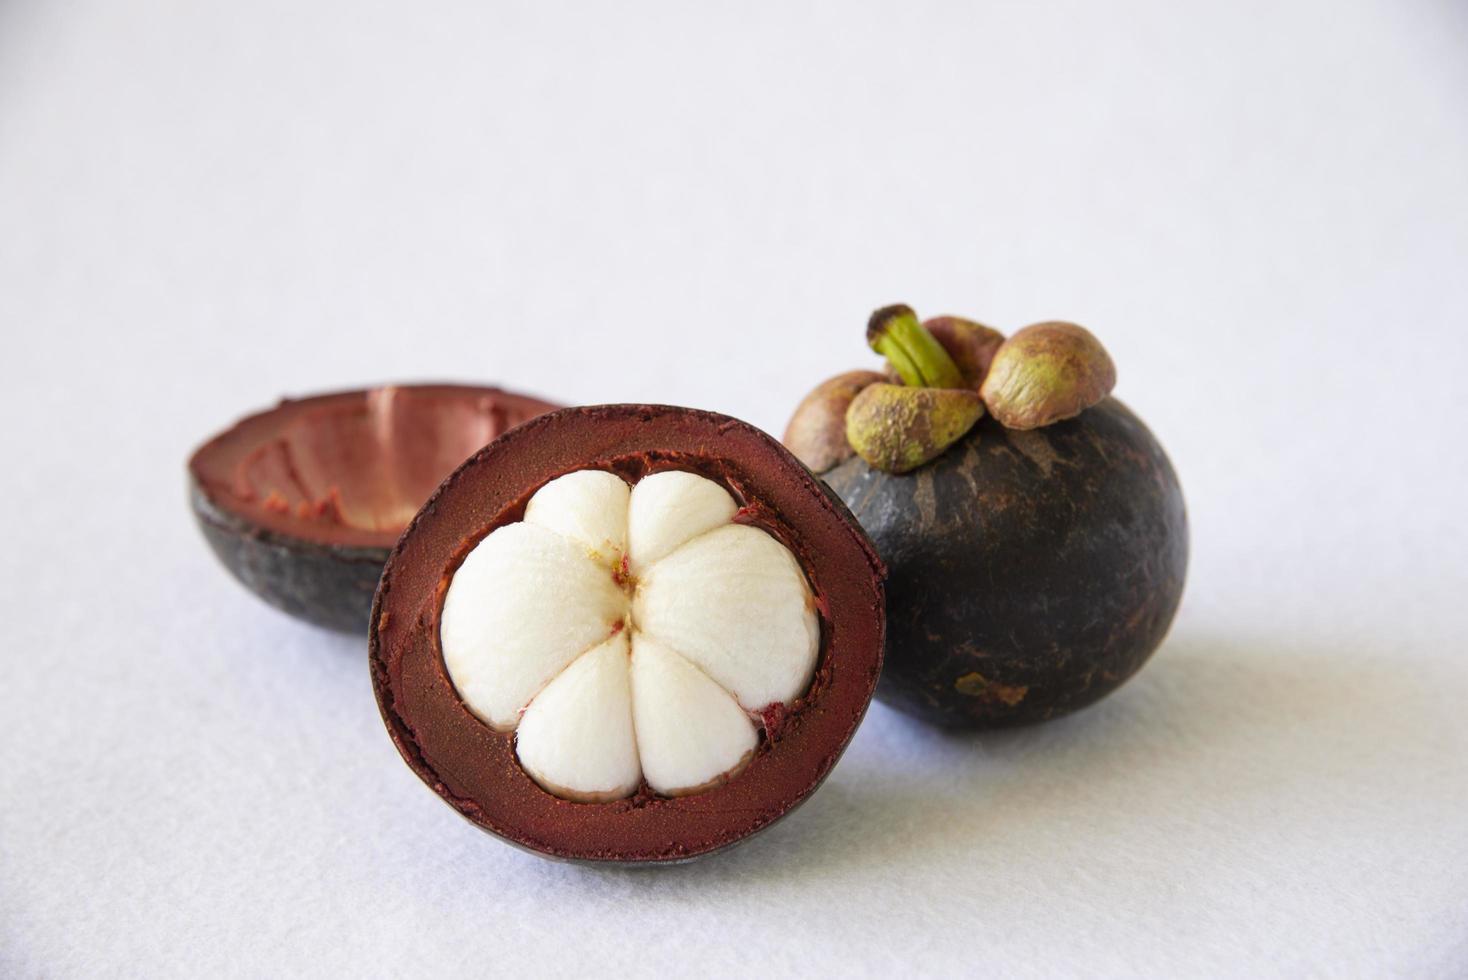 Mangosteen Thai popular fruits - a tropical fruit with sweet juicy white segments of flesh inside a thick reddish-brown rind. photo